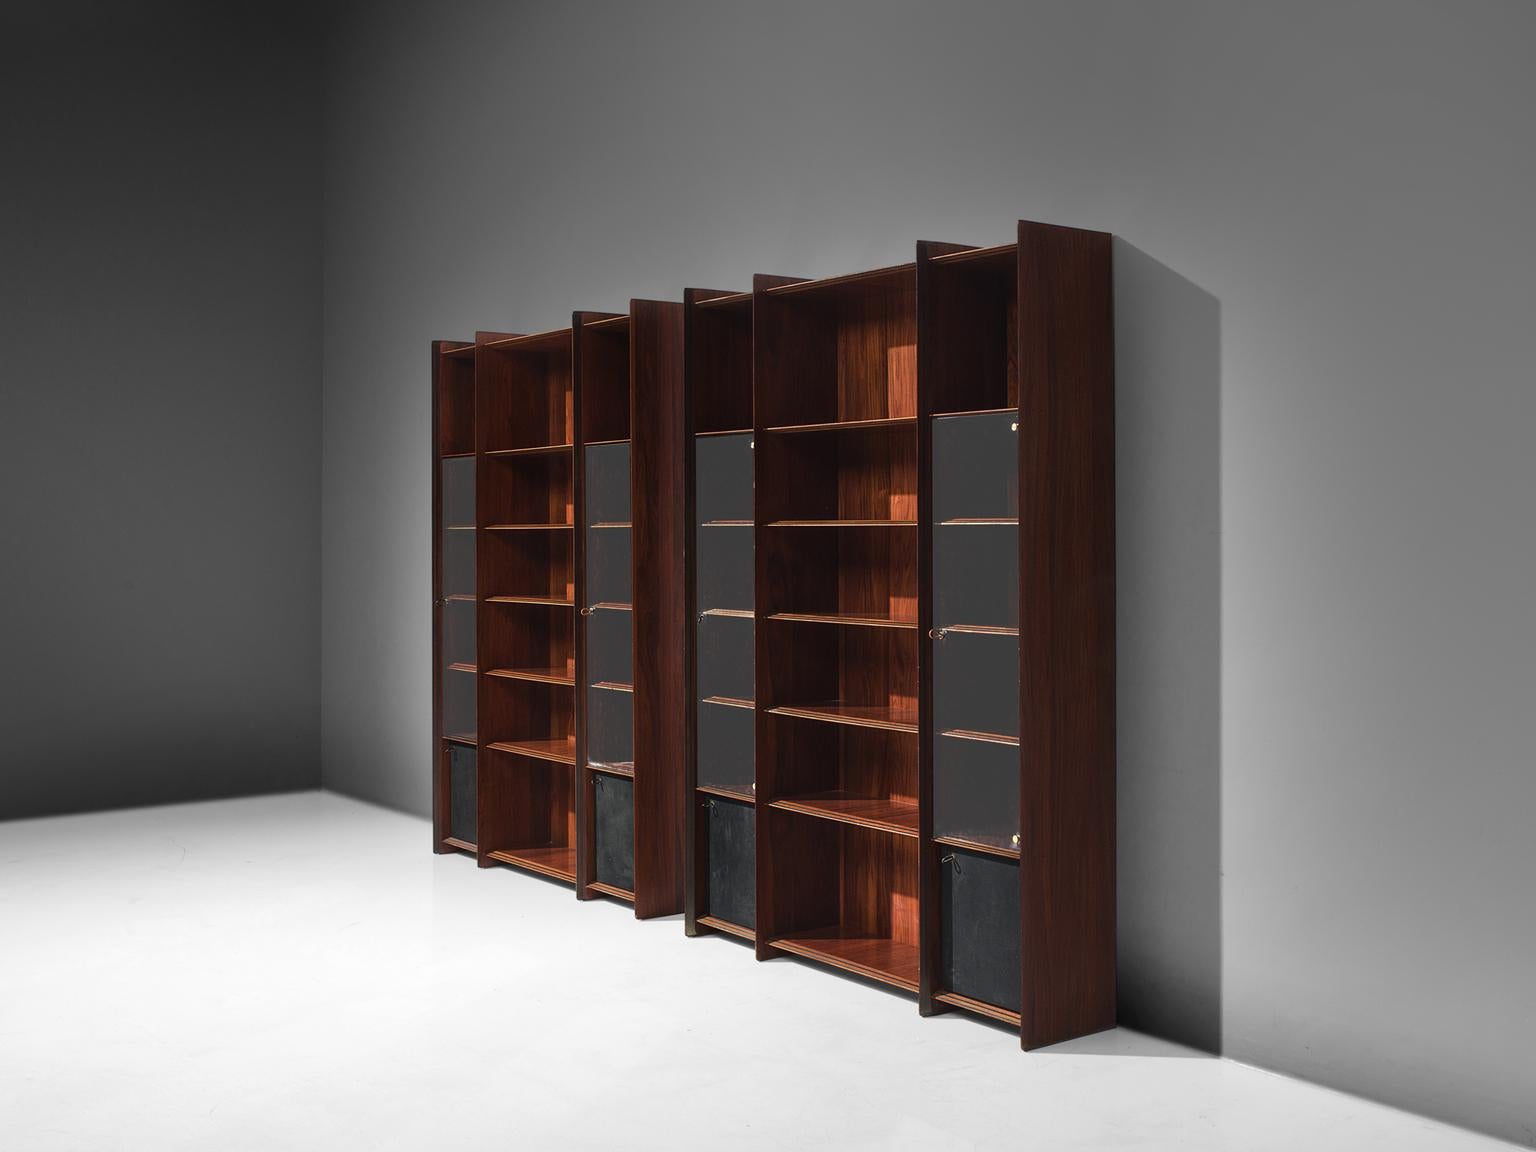 Afra & Tobia Scarpa, Artona cabinets, rosewood, glass and leather, Italy, circa 1975

These cabinets were designed during the first period of the Artona collection, it combines the characteristic solid striped rosewood and the use of a high